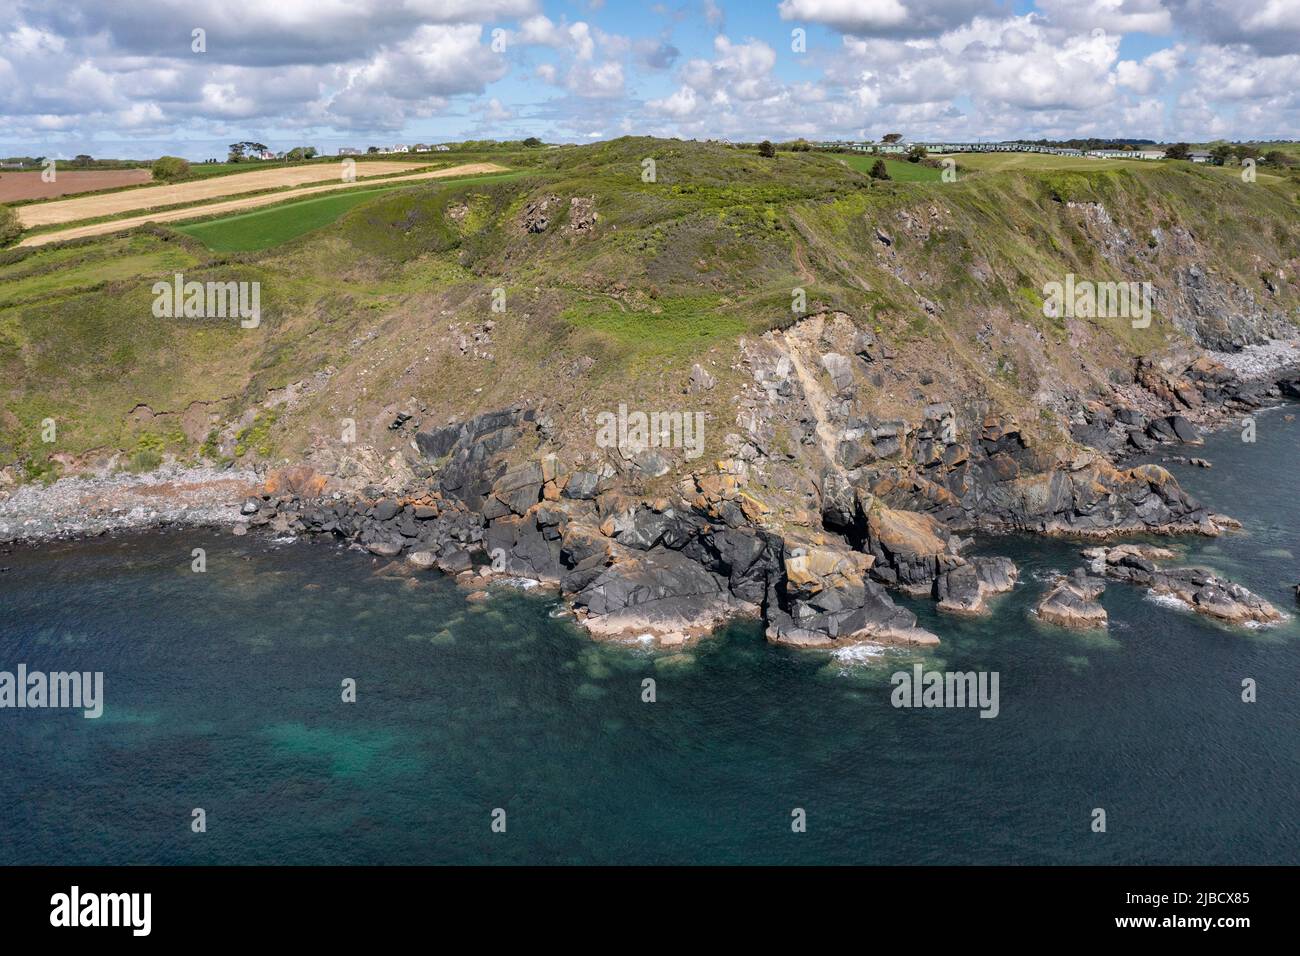 The rugged coastline of Cornwall, England in the Poltesco area as seen from a drone. Stock Photo